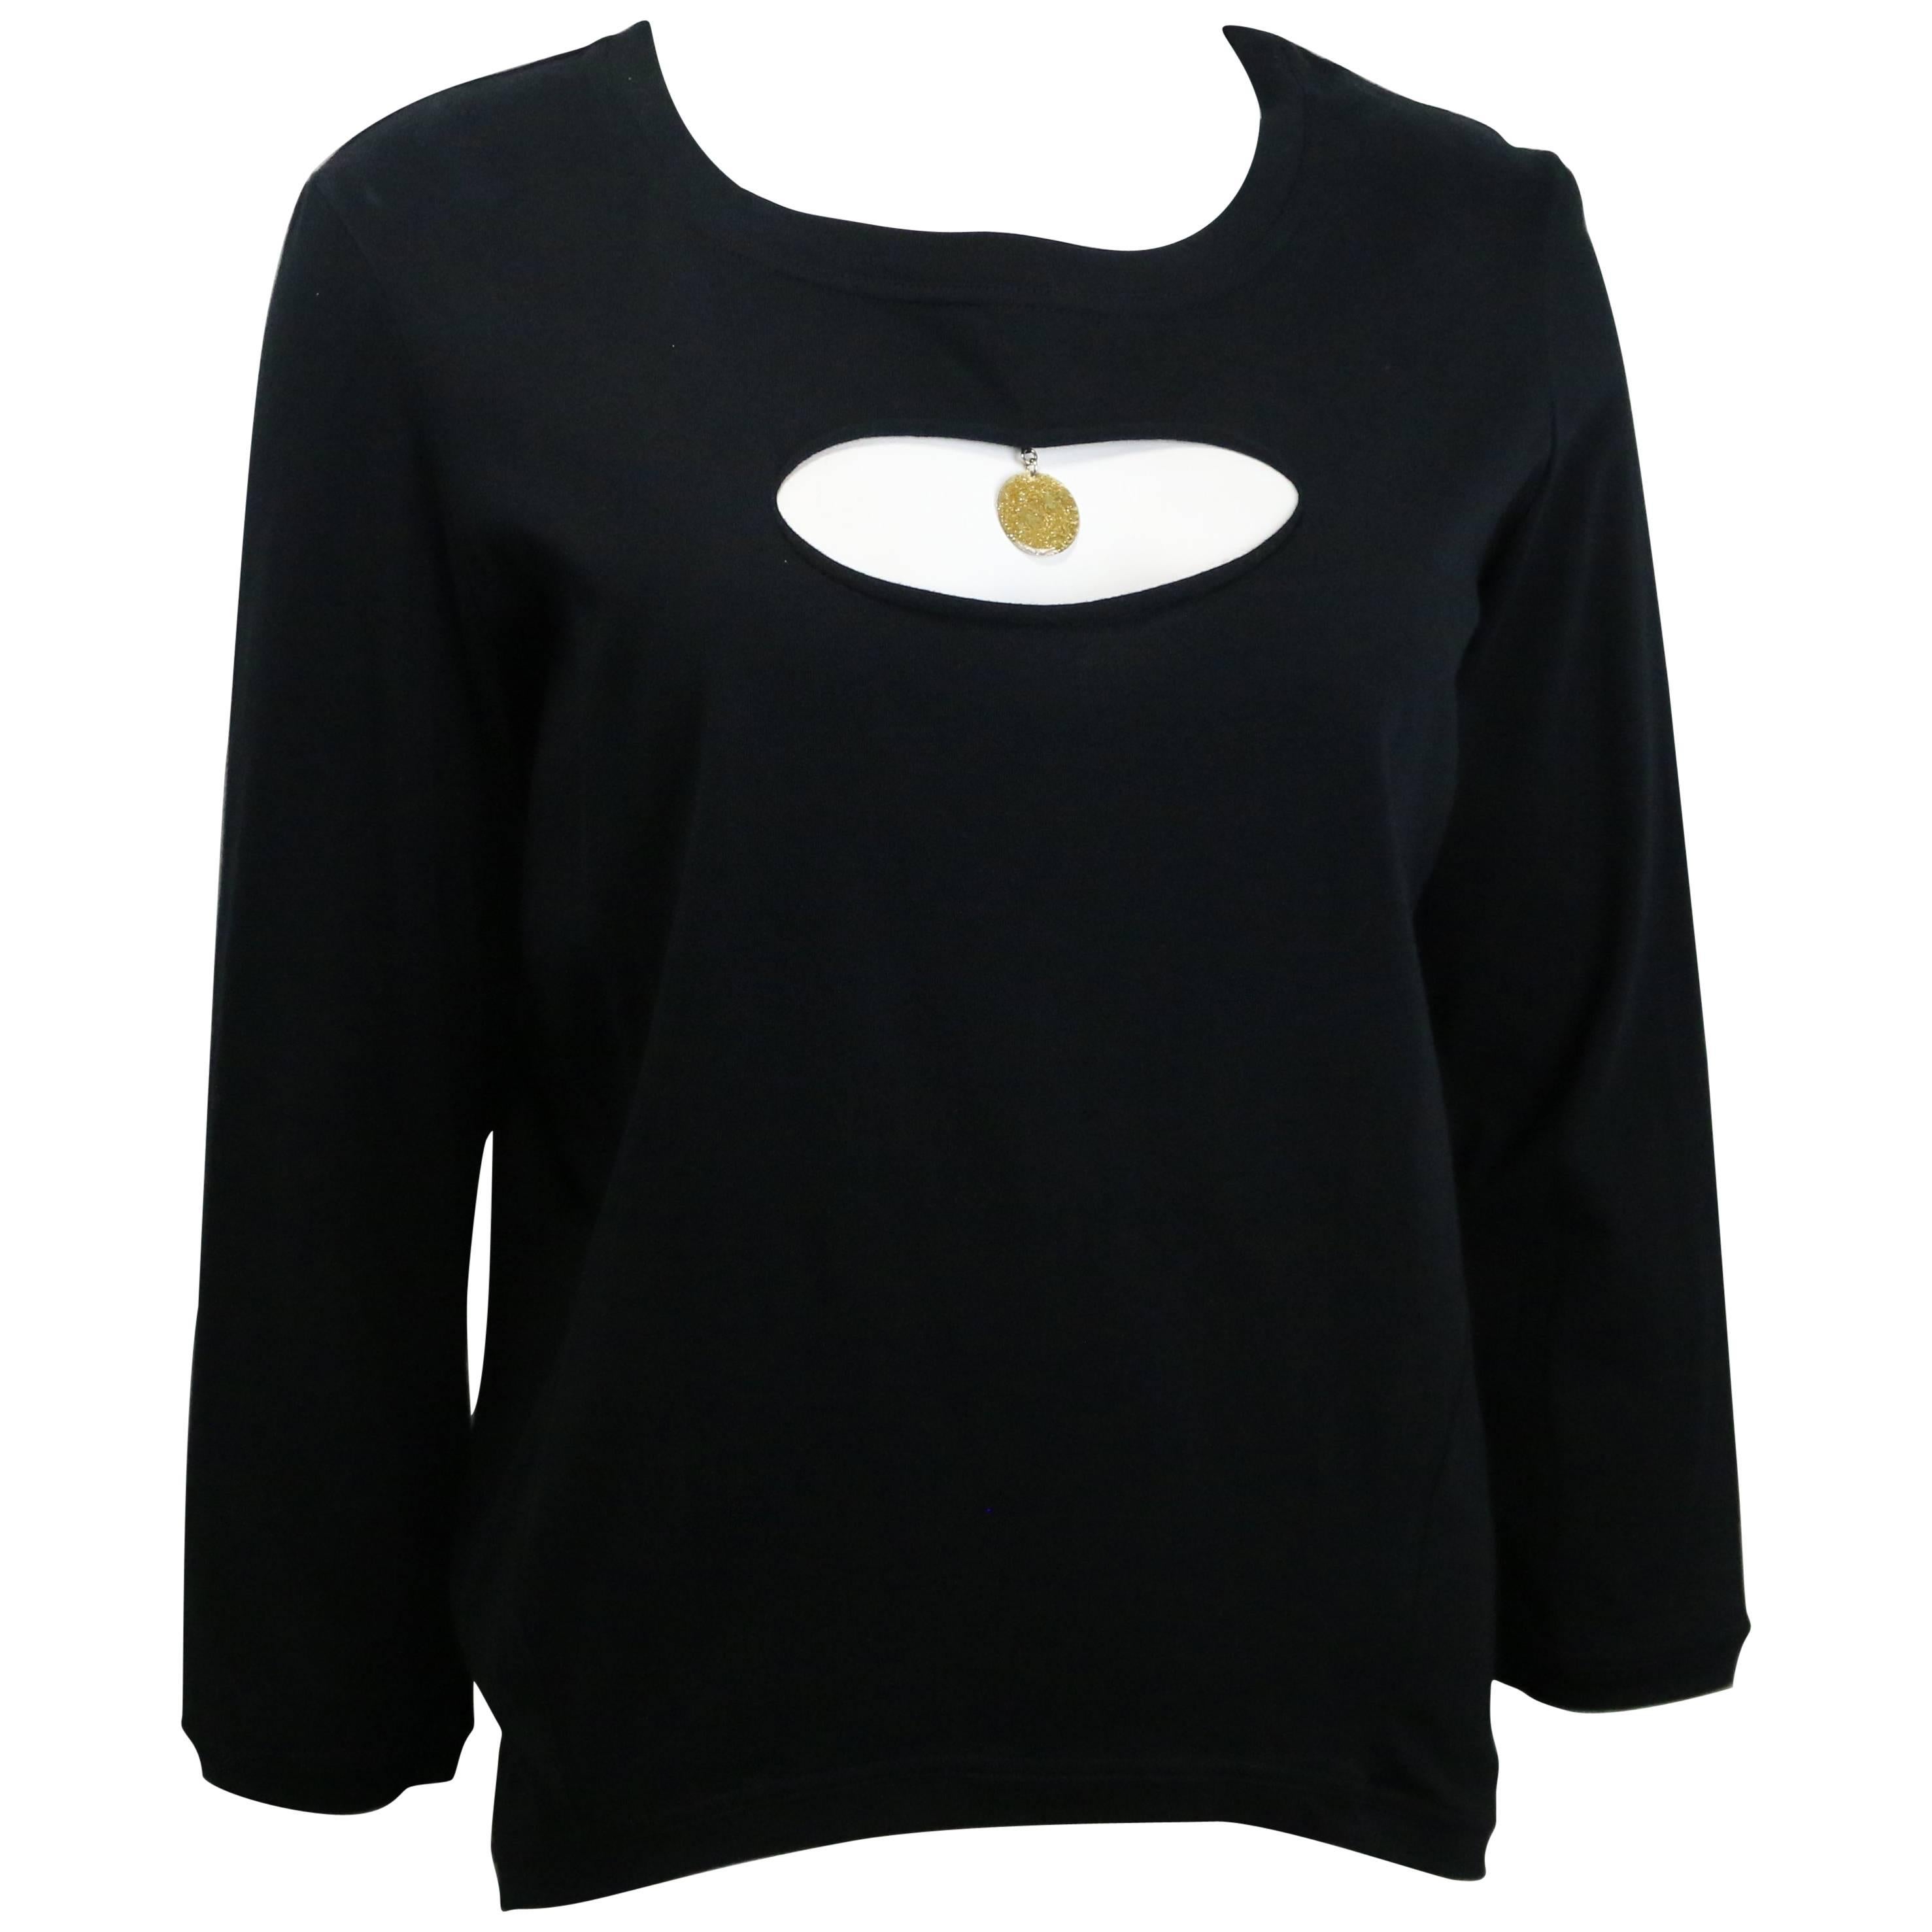 Chanel Black Cotton Front Cutout with Gold Medallion Top 